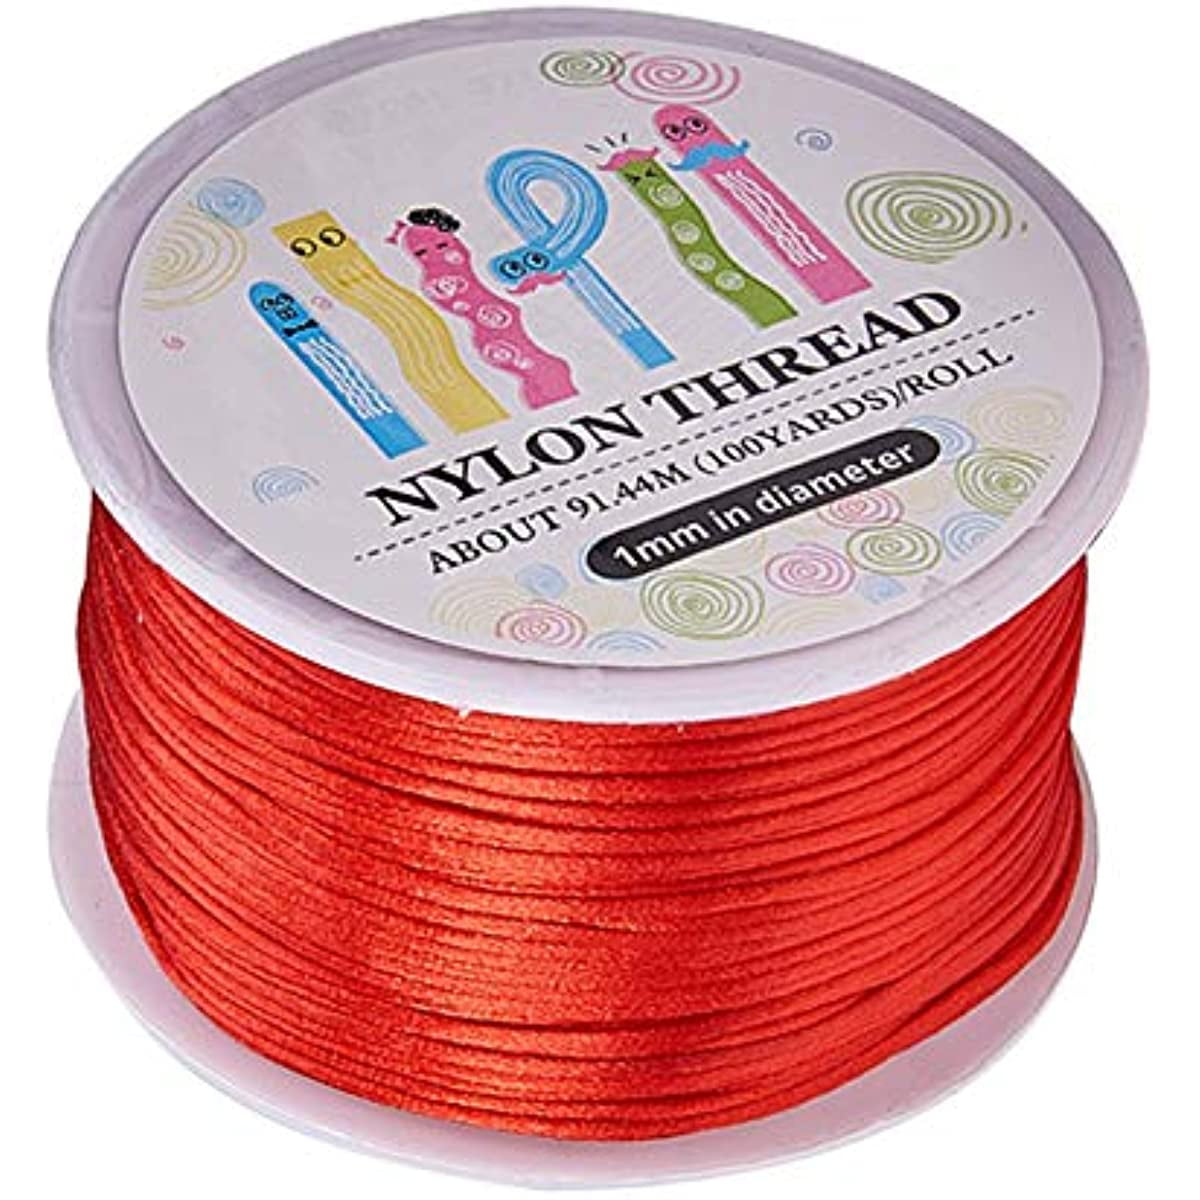 FireLine Braided Beading Thread, 4lb Test Weight and .005 Thick, 15 Yard  Spool, Black Satin 